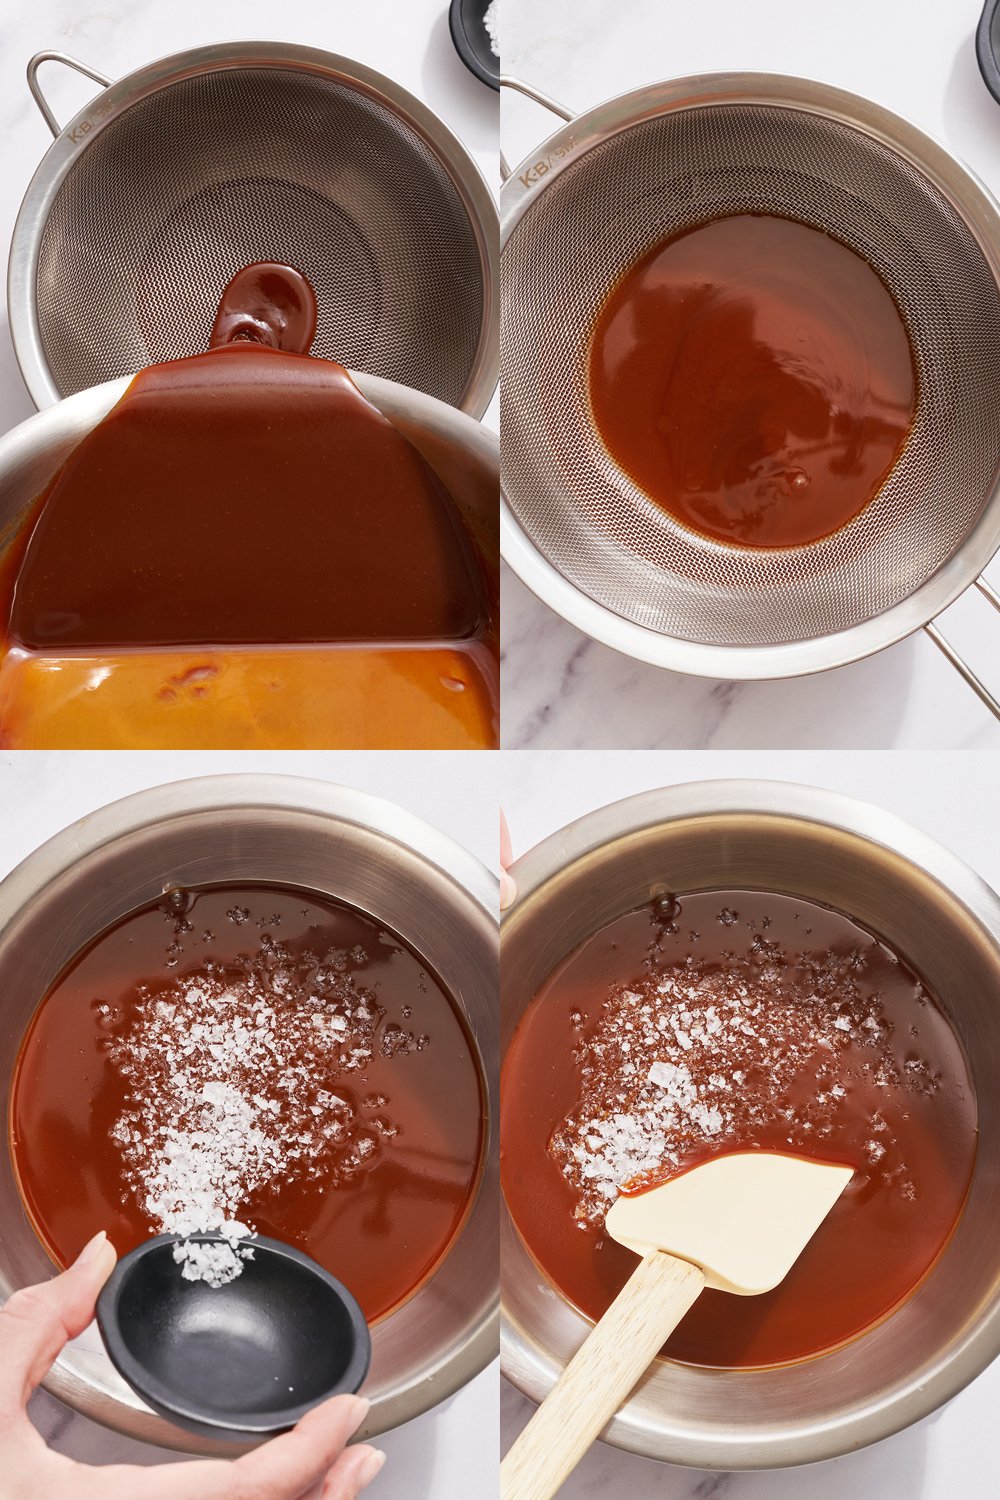 step-by-step process shots of adding flaky sea salt to the caramel, and transferring the caramel sauce to a jar to store.